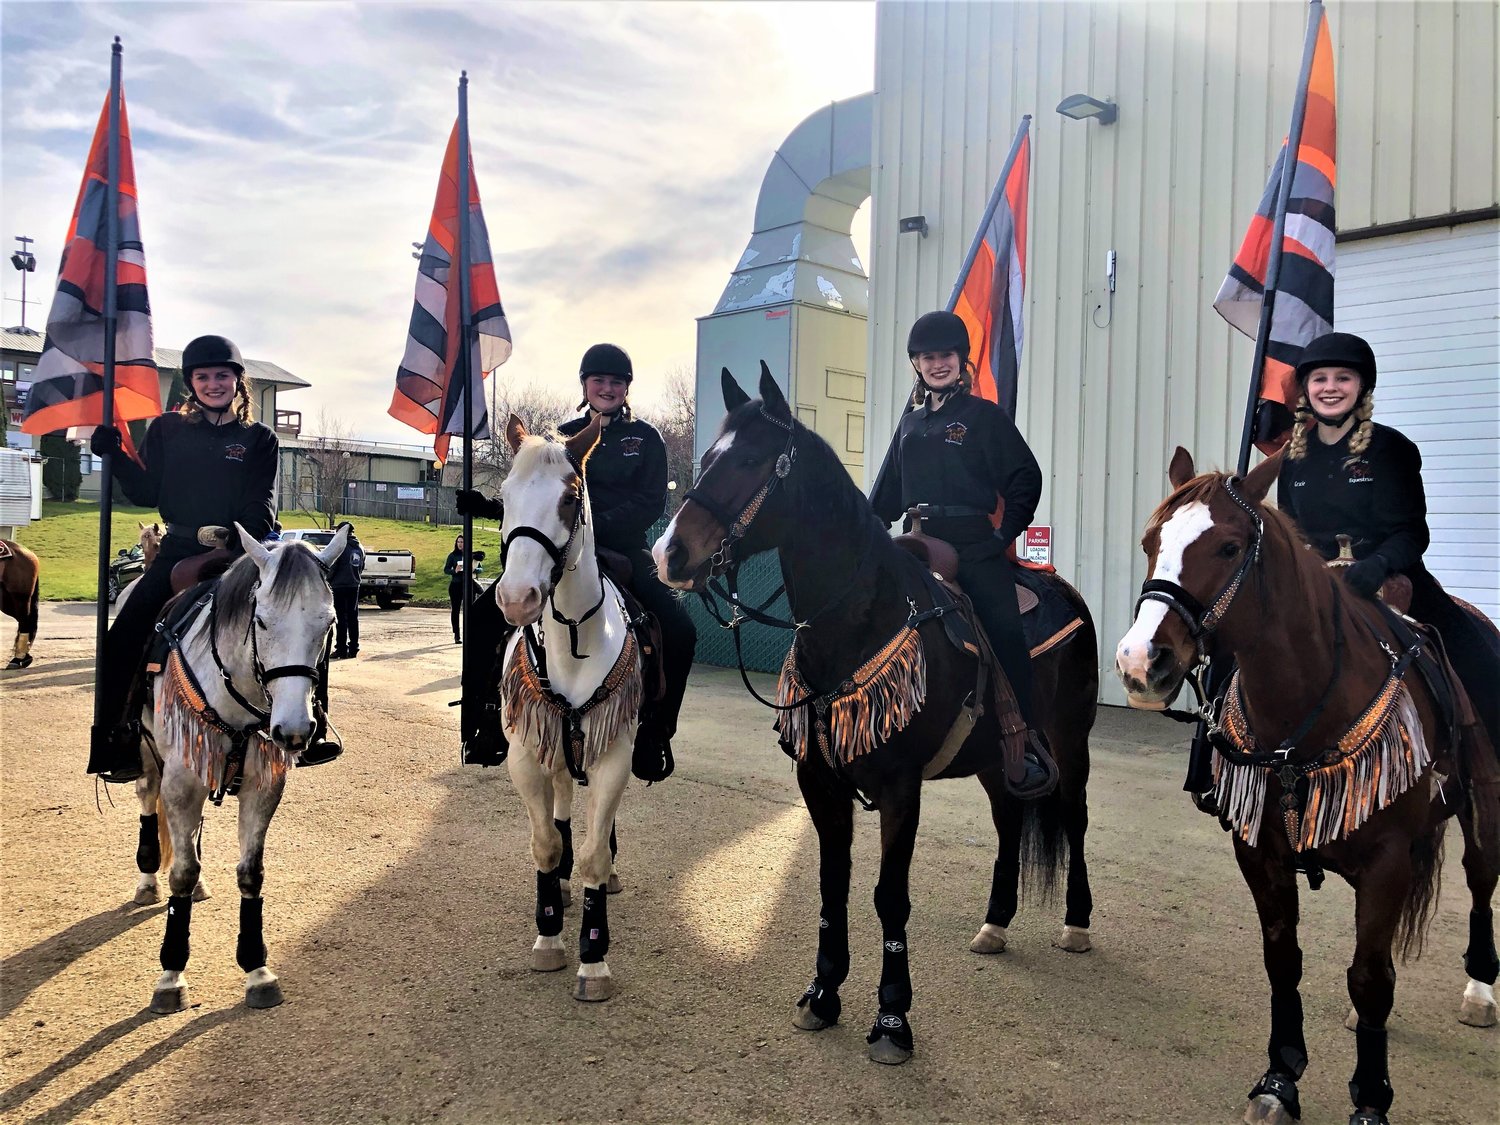 Drill Team B (left to right): Tailor Obrist on Looney; Emma Messer on Mohave; Julie Thomas on Ray and Gracie Kemp on DeeDee.